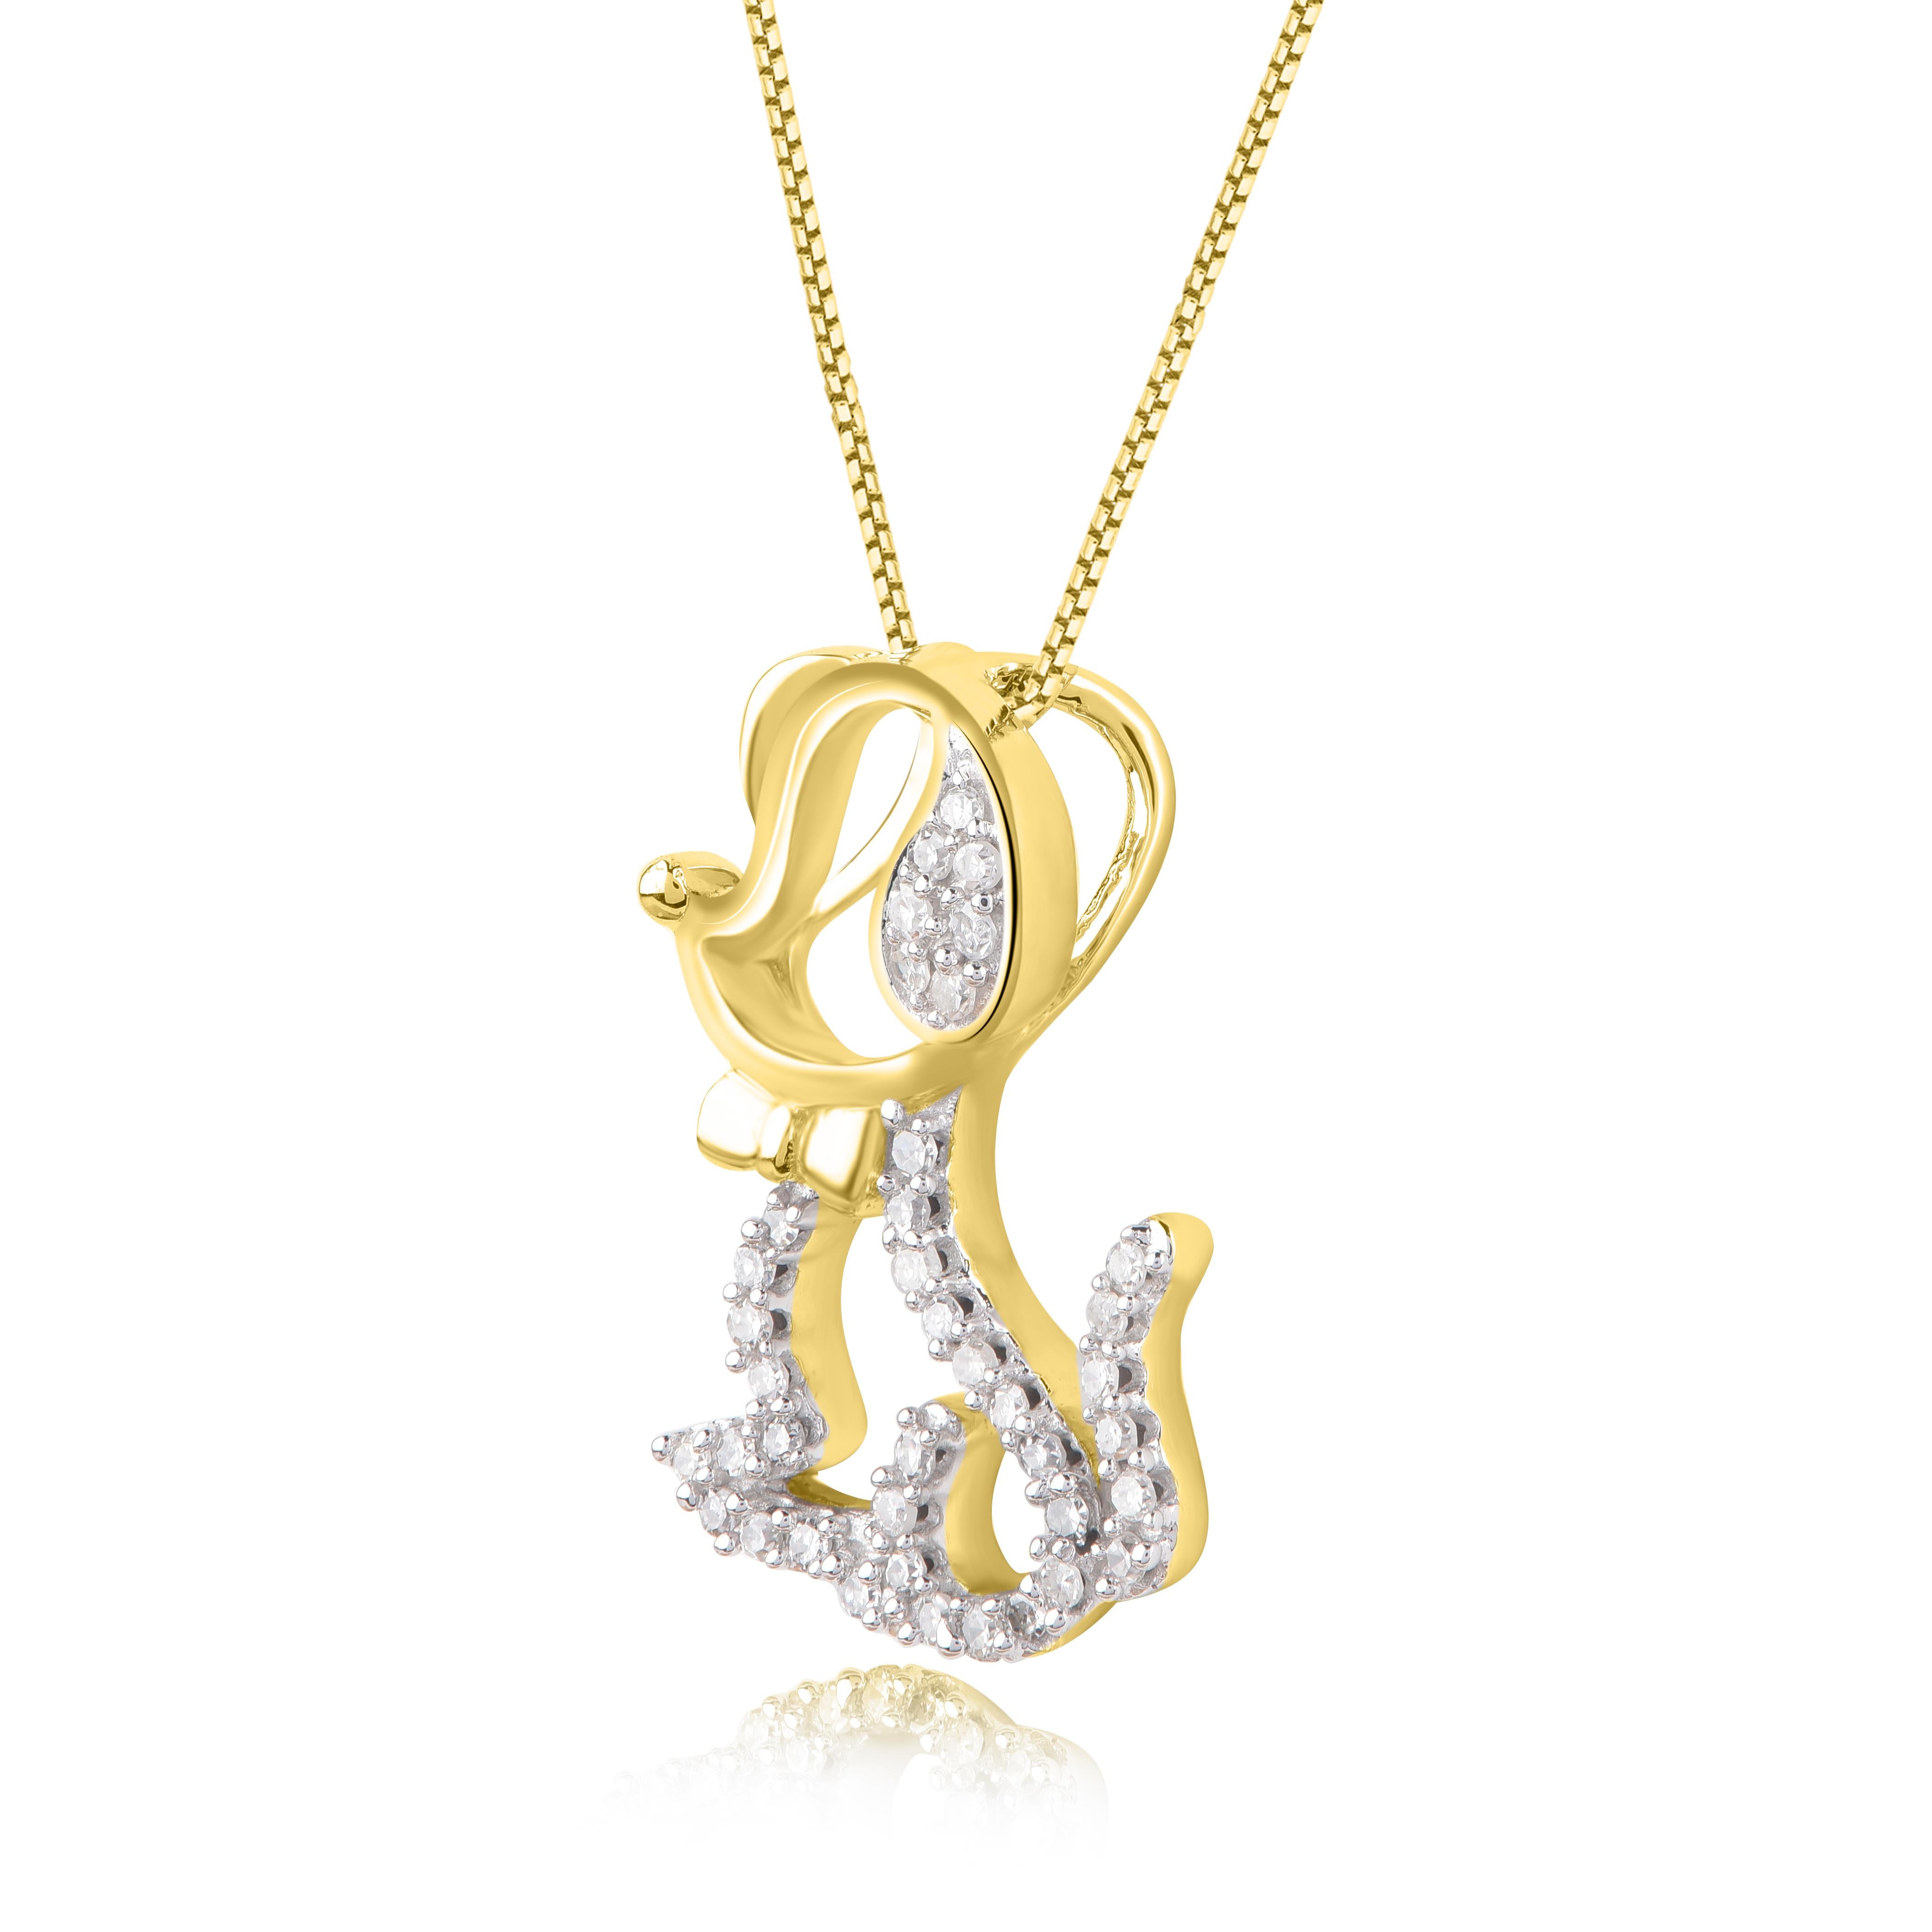 A striking addition when worn on its own, this diamond pendant makes a stunning impression. This pendant is crafted from 14-karat yellow gold and features 39 single cut diamonds set in prong and pave setting. H-I color I2 clarity and a high polish